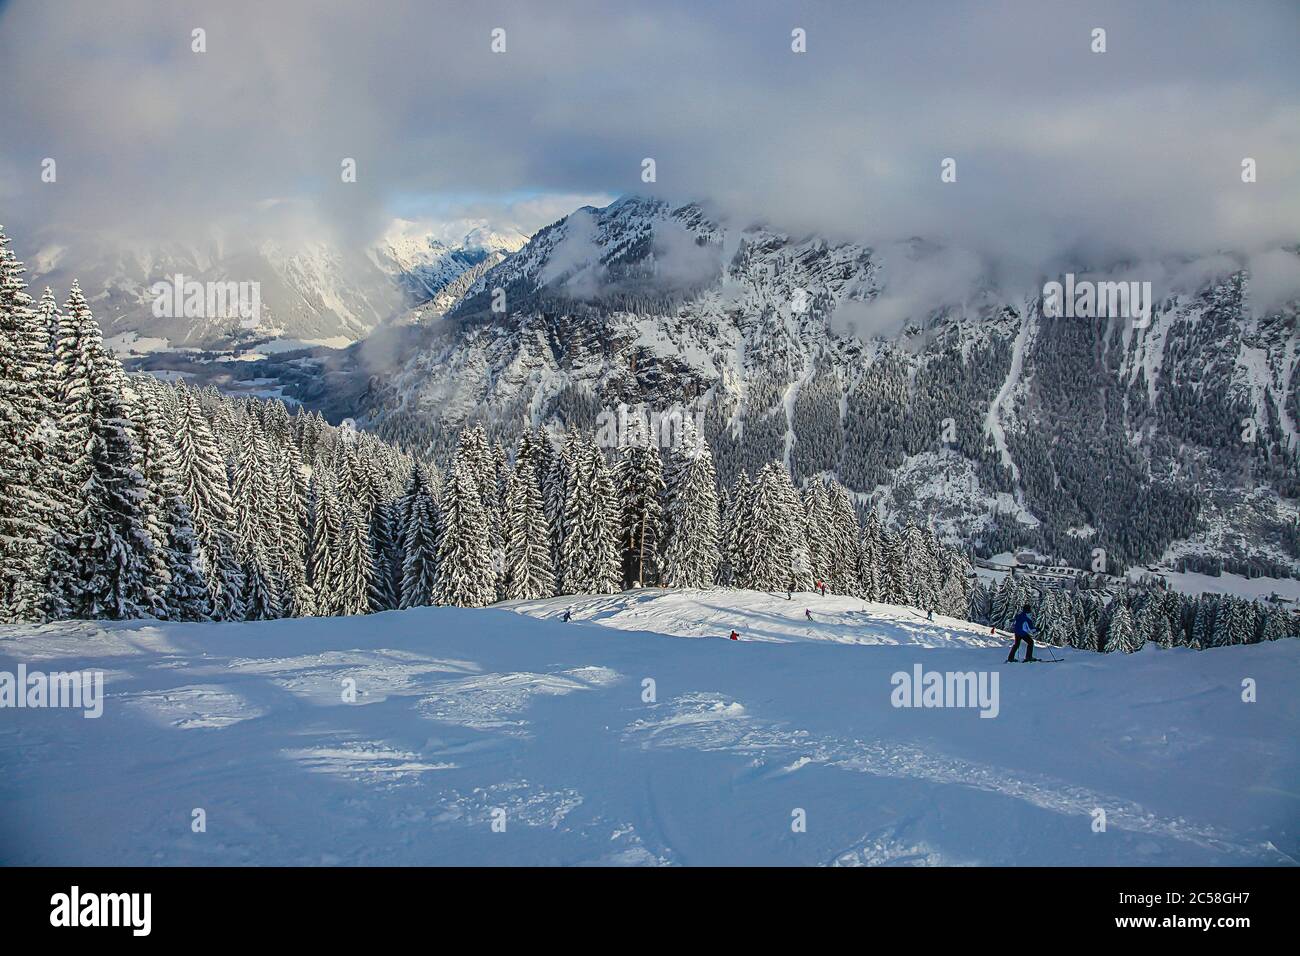 Ski slope in clear weather Stock Photo